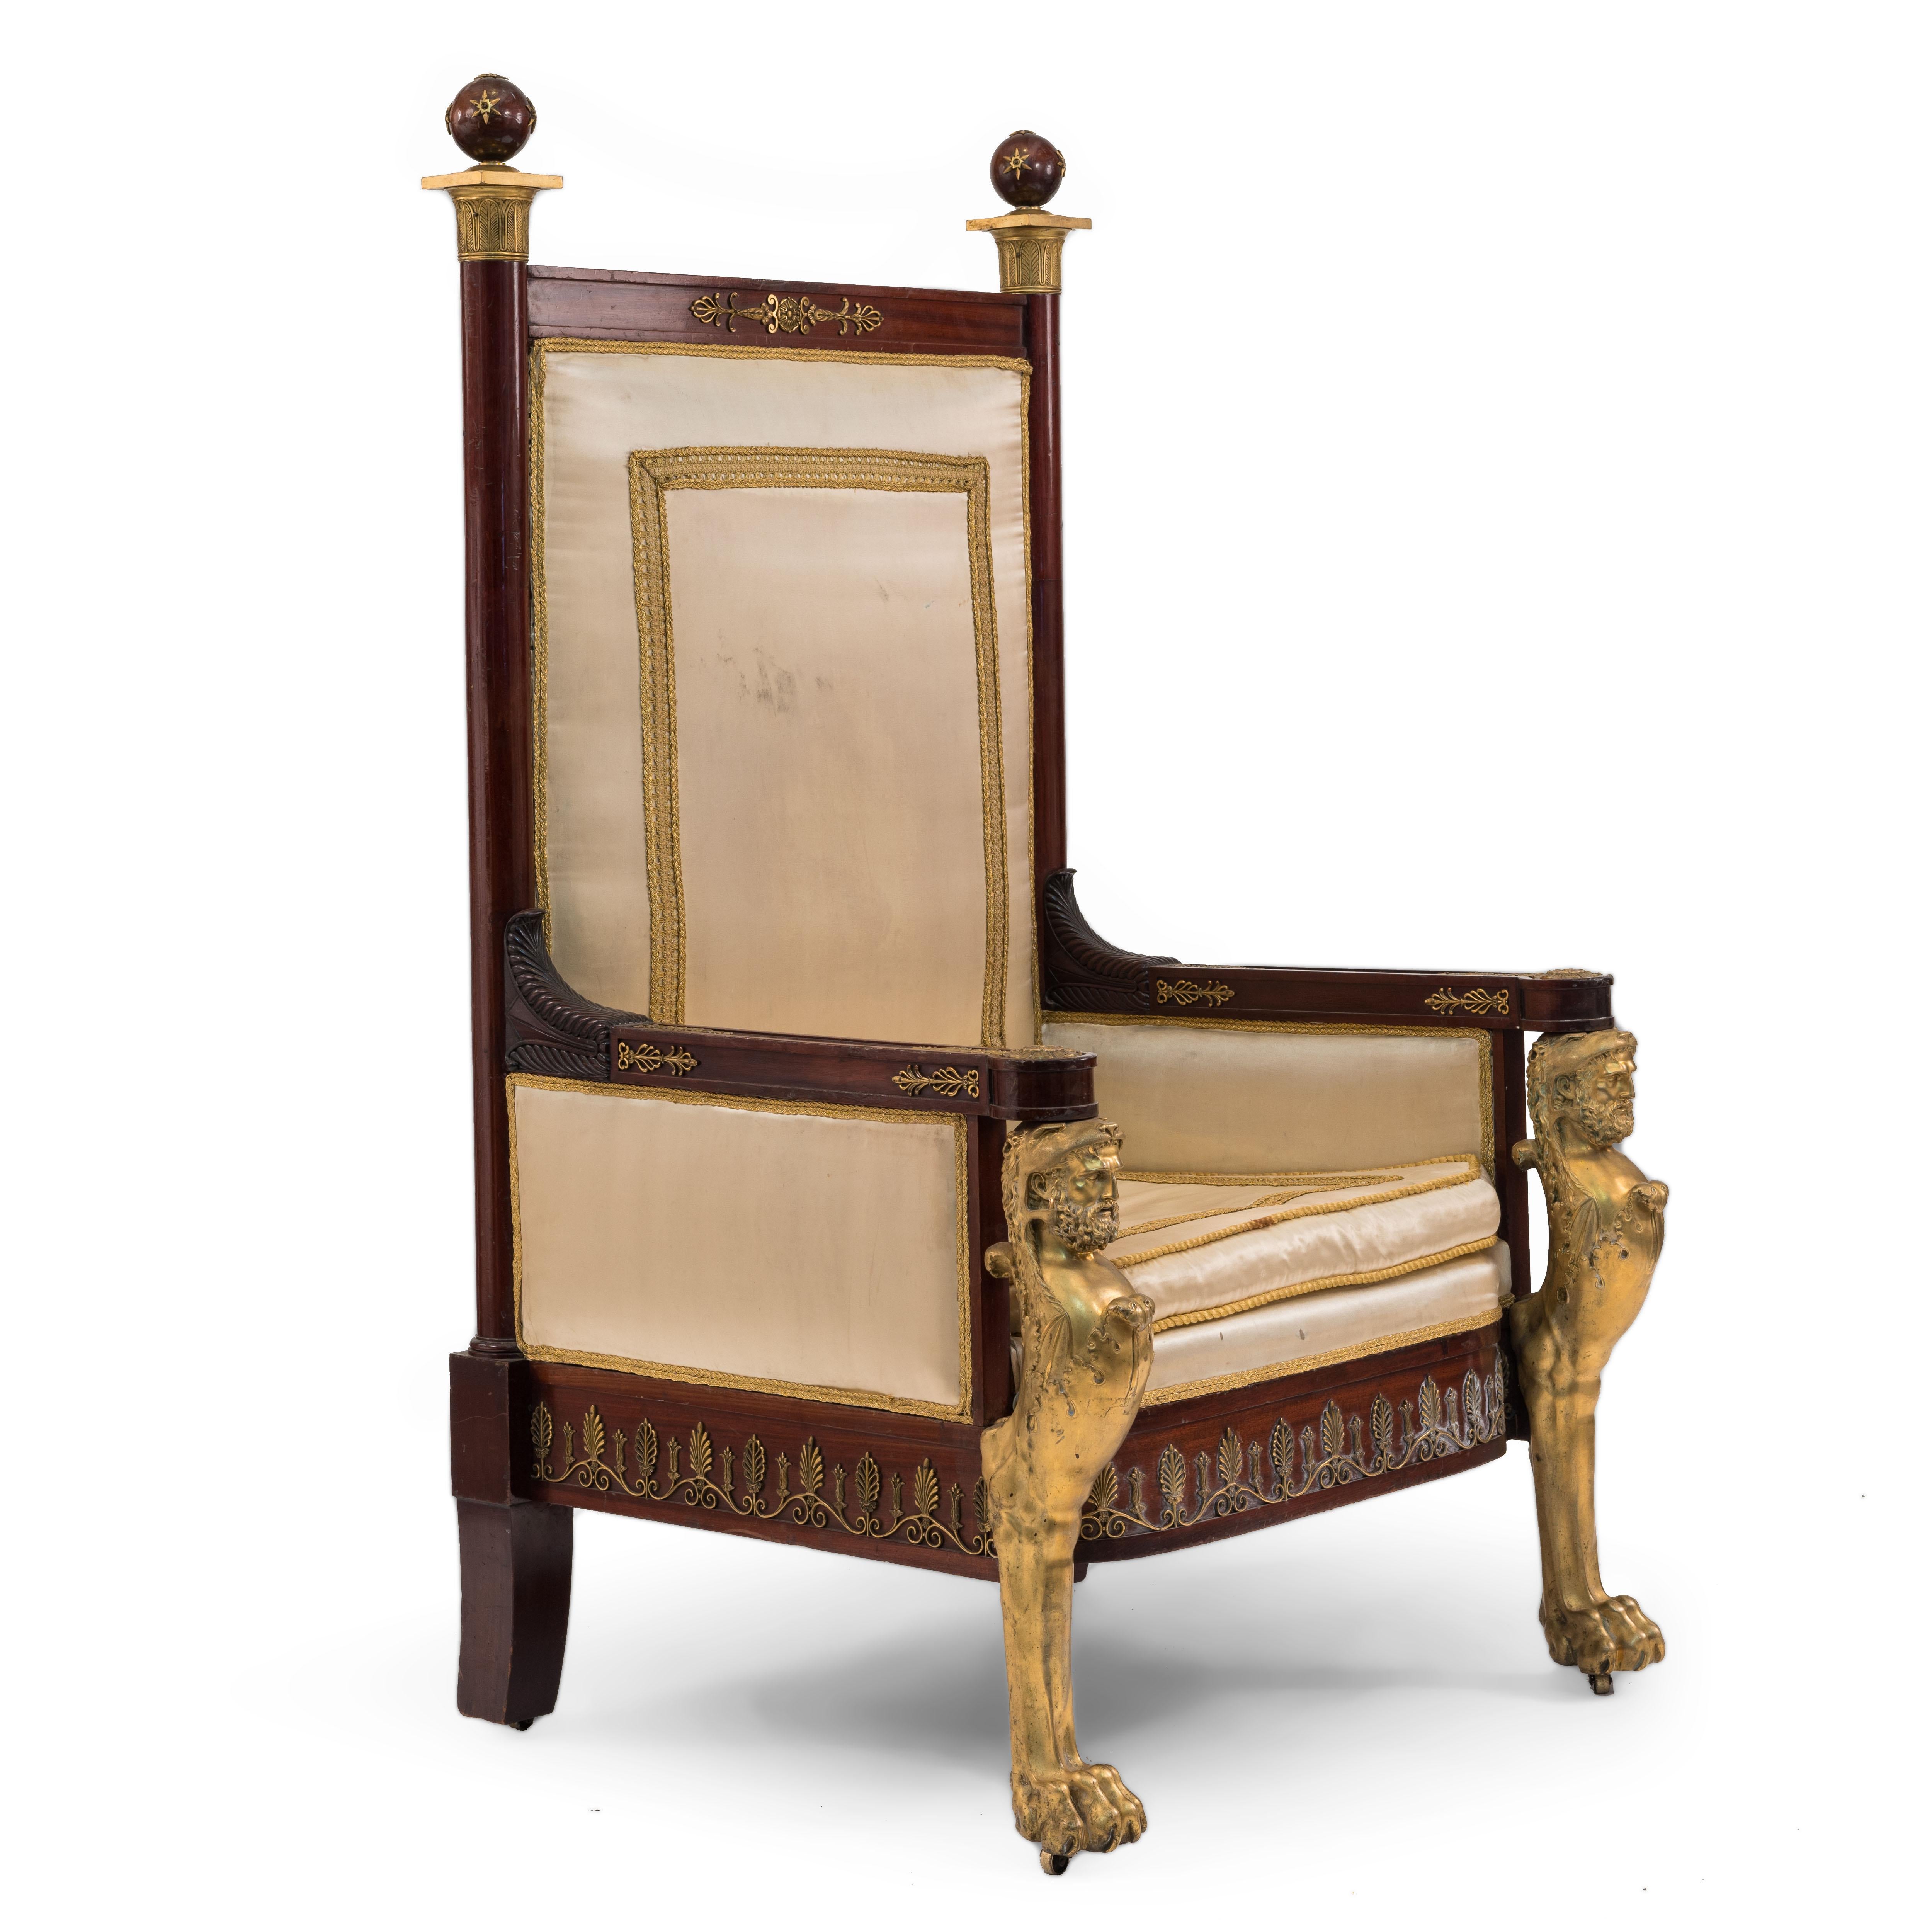 French Empire style 19th Century mahogany throne chair with bronze dore figural front legs and trim with eggshell upholstery.

  